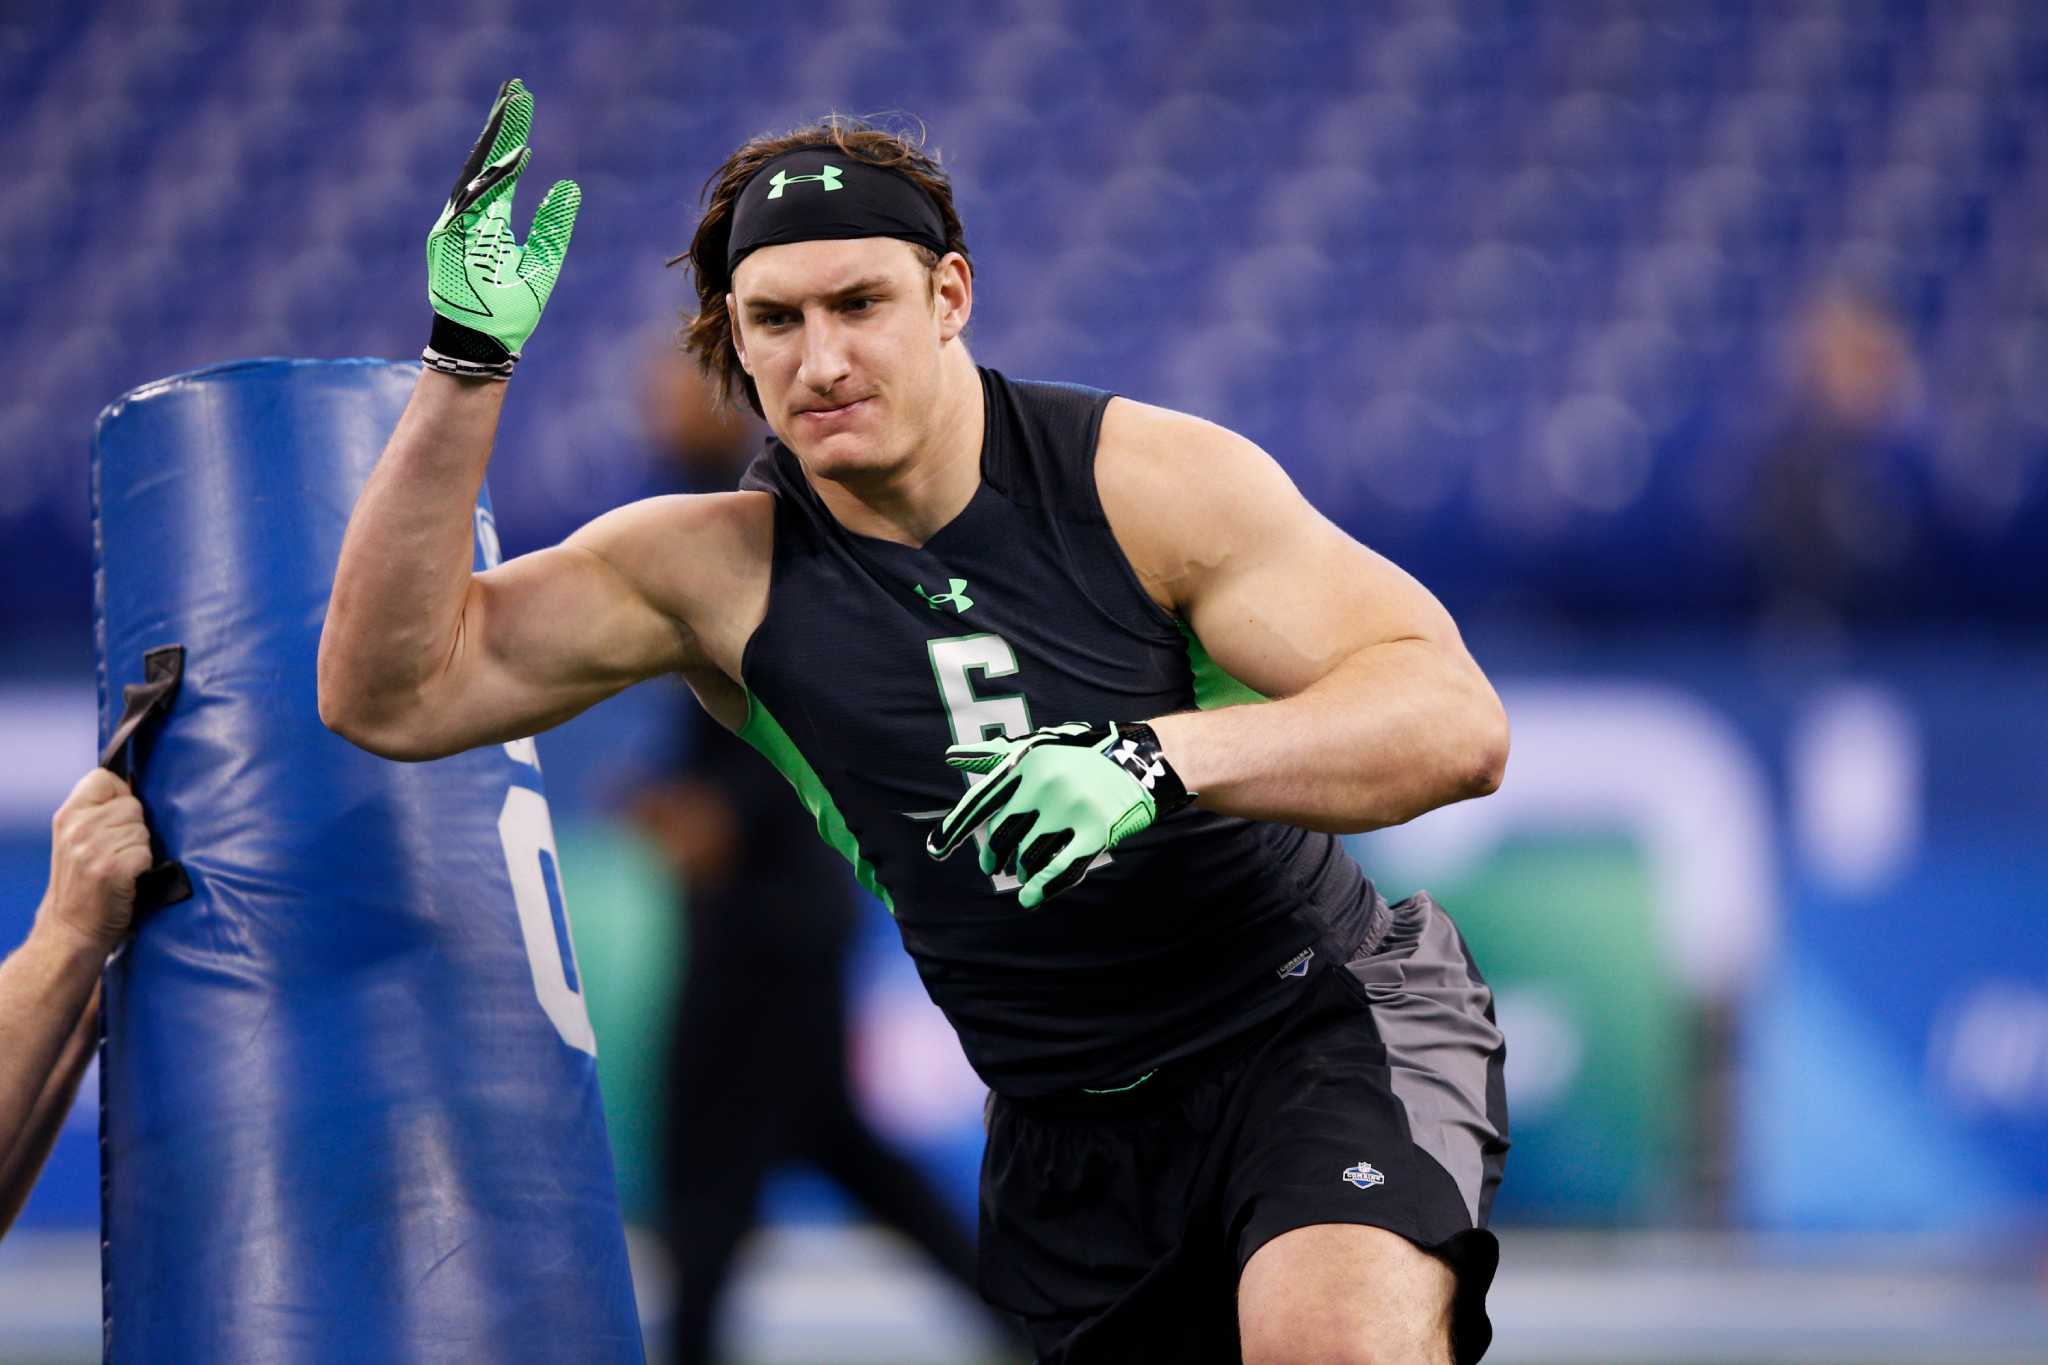 Ohio State defensive end Joey Bosa follows father's footsteps to NFL